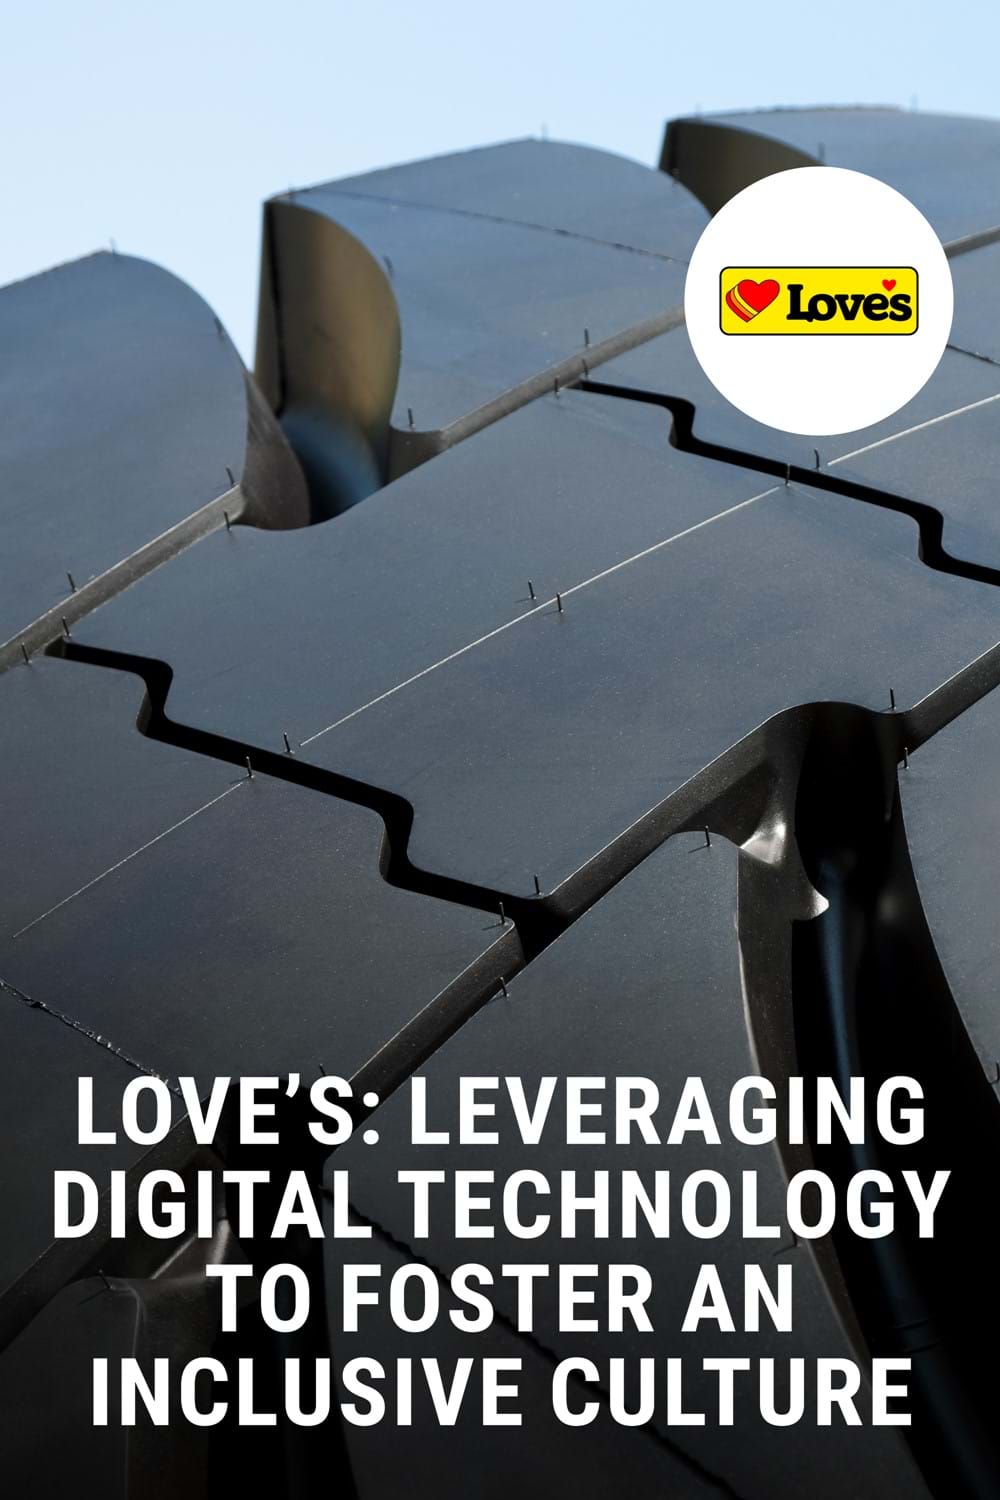 'Love’s: Leveraging digital technology to foster an inclusive culture' case study flat pages